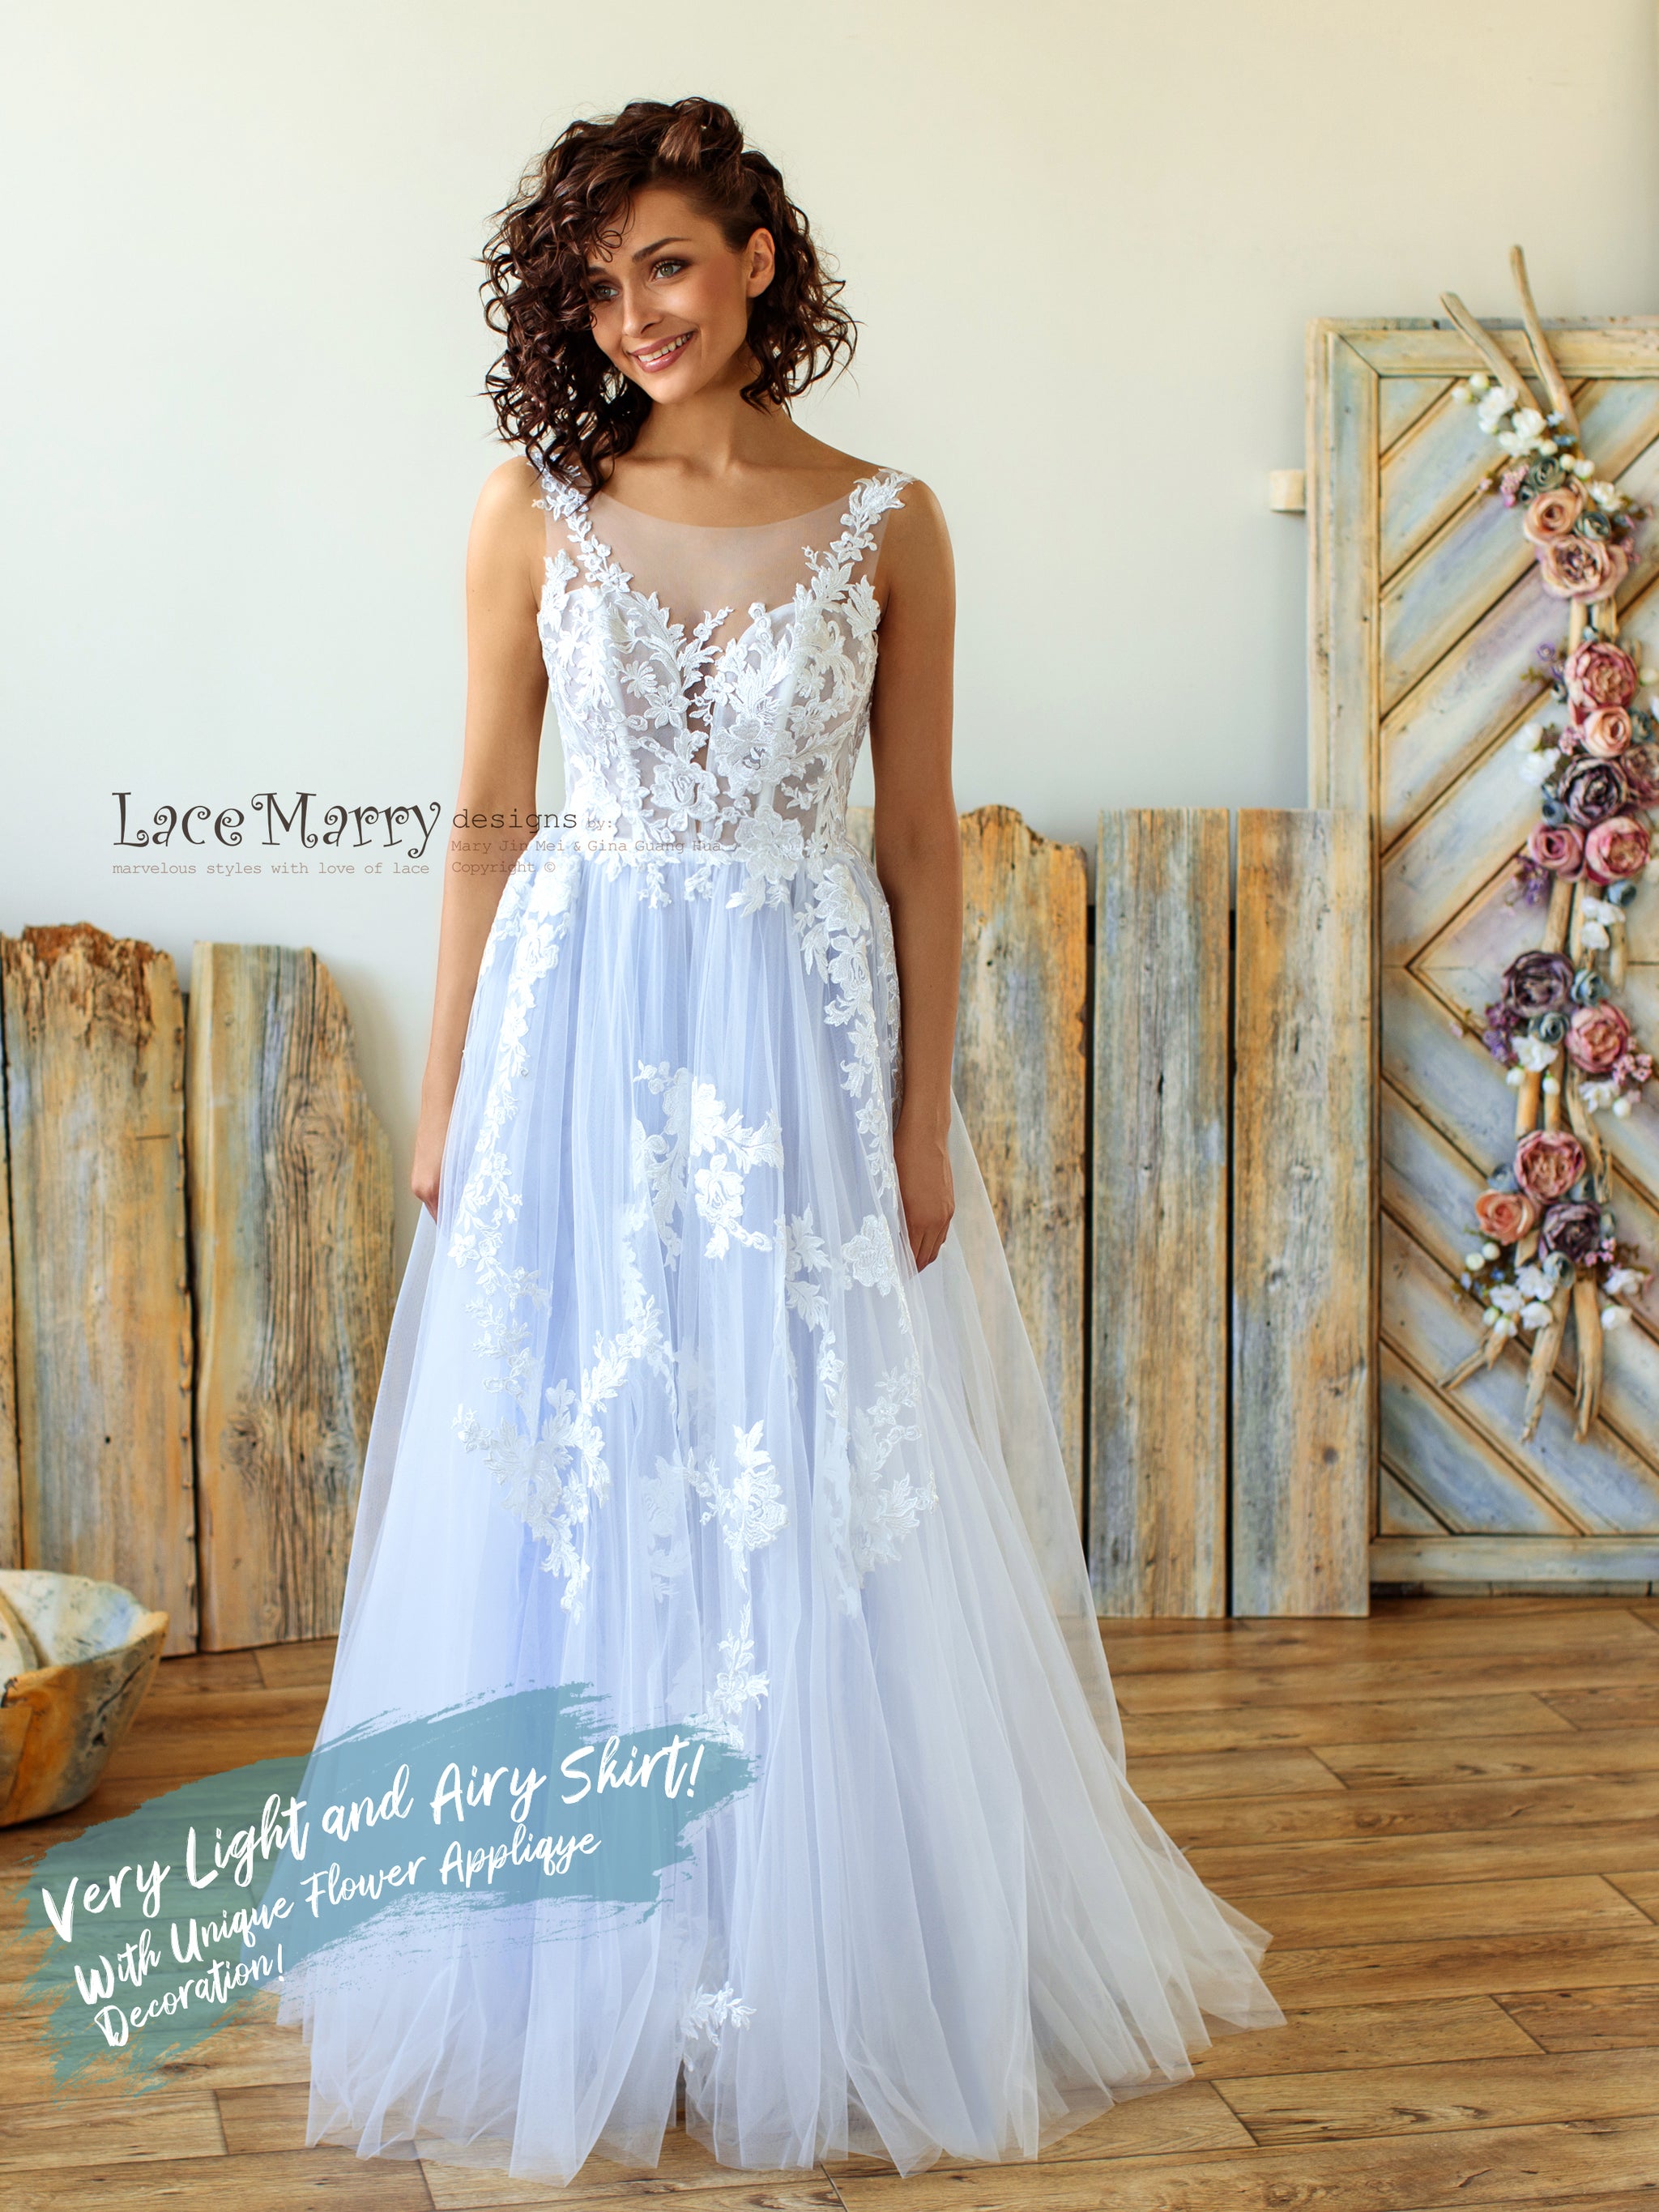 Off the shoulder Ivory wedding dress with brocade textured pattern-  Flagship Mori Lee stockist | Mori lee wedding dress, Ivory wedding dress,  Ball gowns